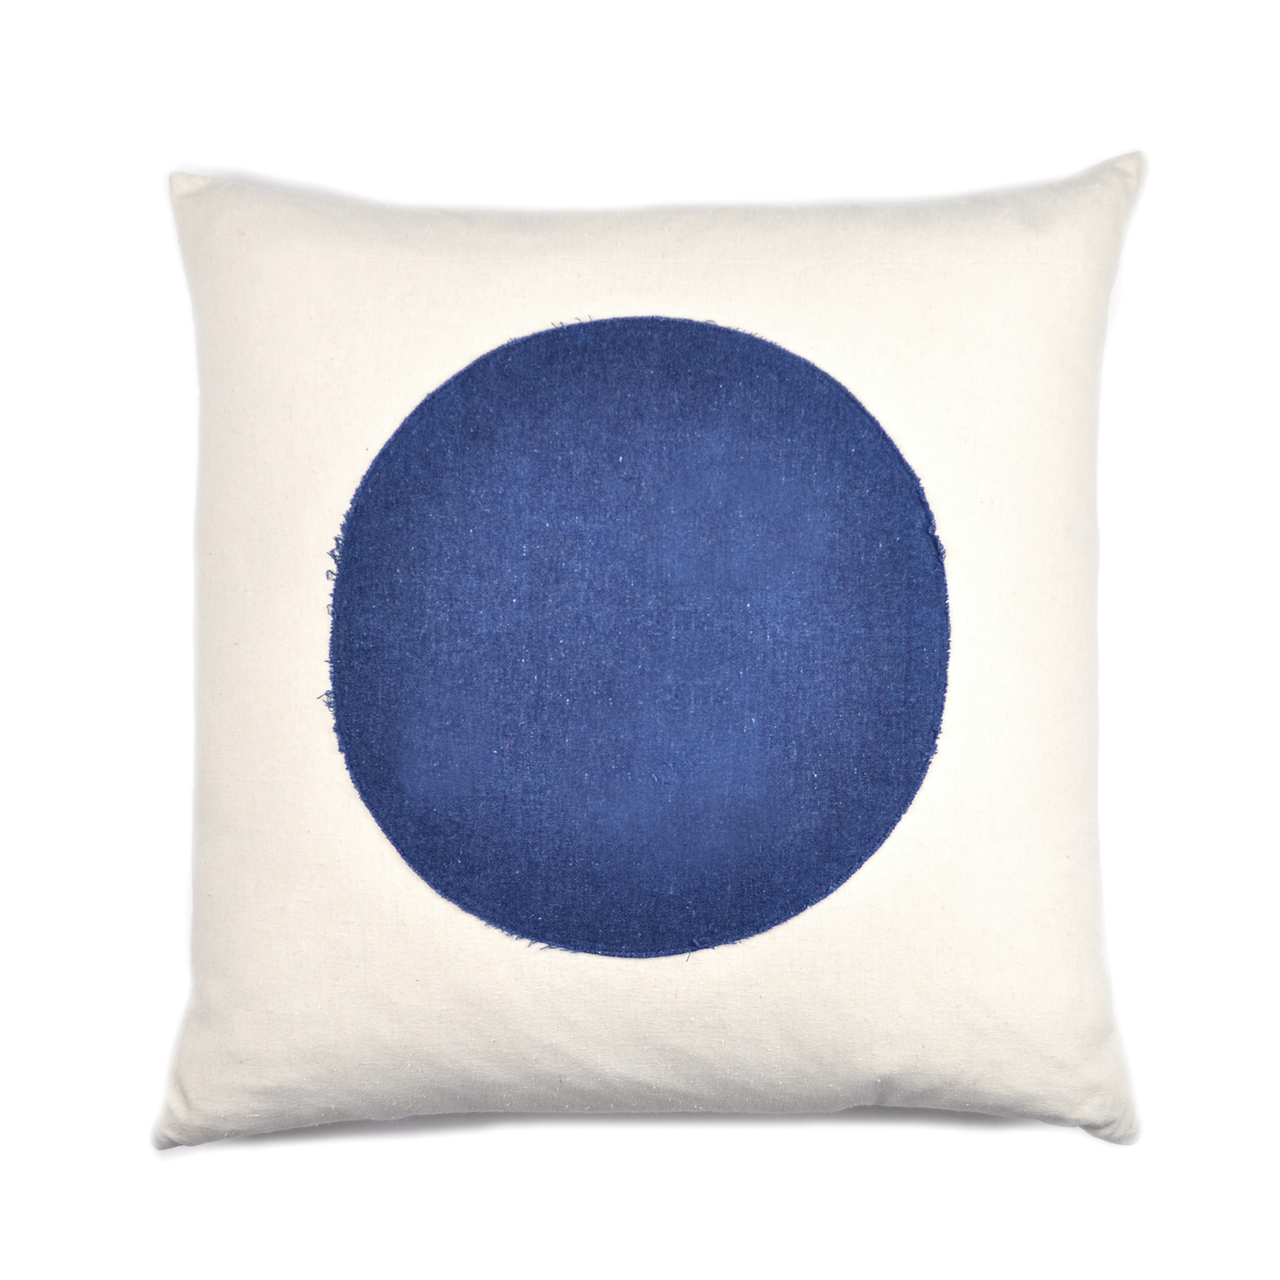 Handmade Indigo Floor Pillow Cover / Pillowcase in Signal Flag (Blue Circle)  fits a Euro Size Pillow Insert (not included) - THE BEACH PLUM COMPANY